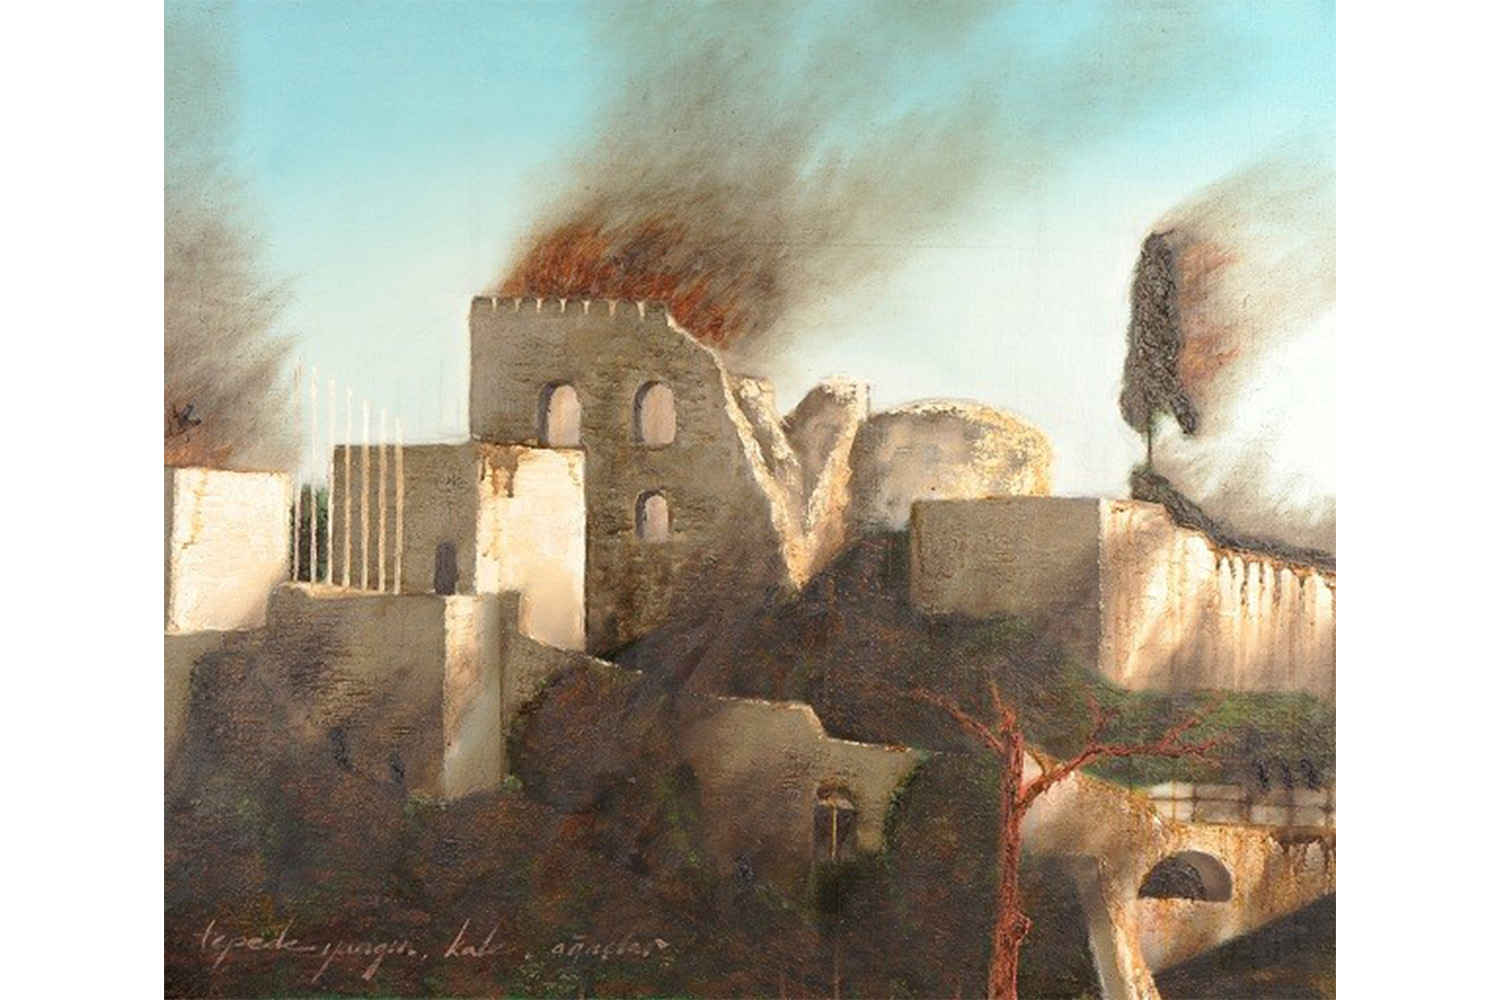 ERHAN OZISIKLI, Fire,Castle, Trees on the Hill, 2013